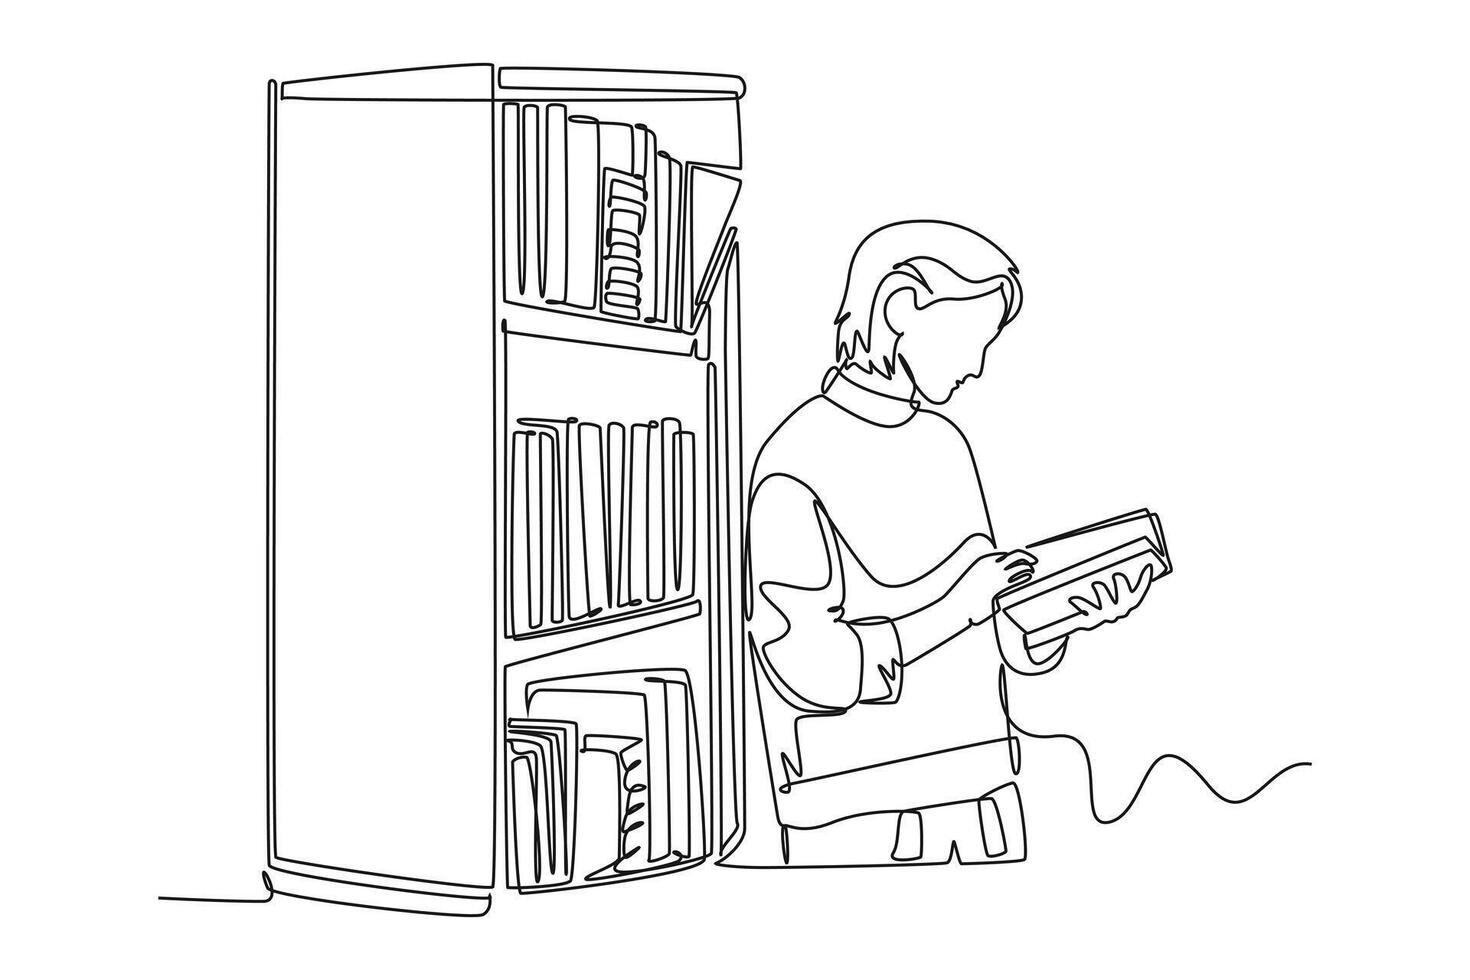 Continuous one line drawing library concept. Doodle illustration. vector